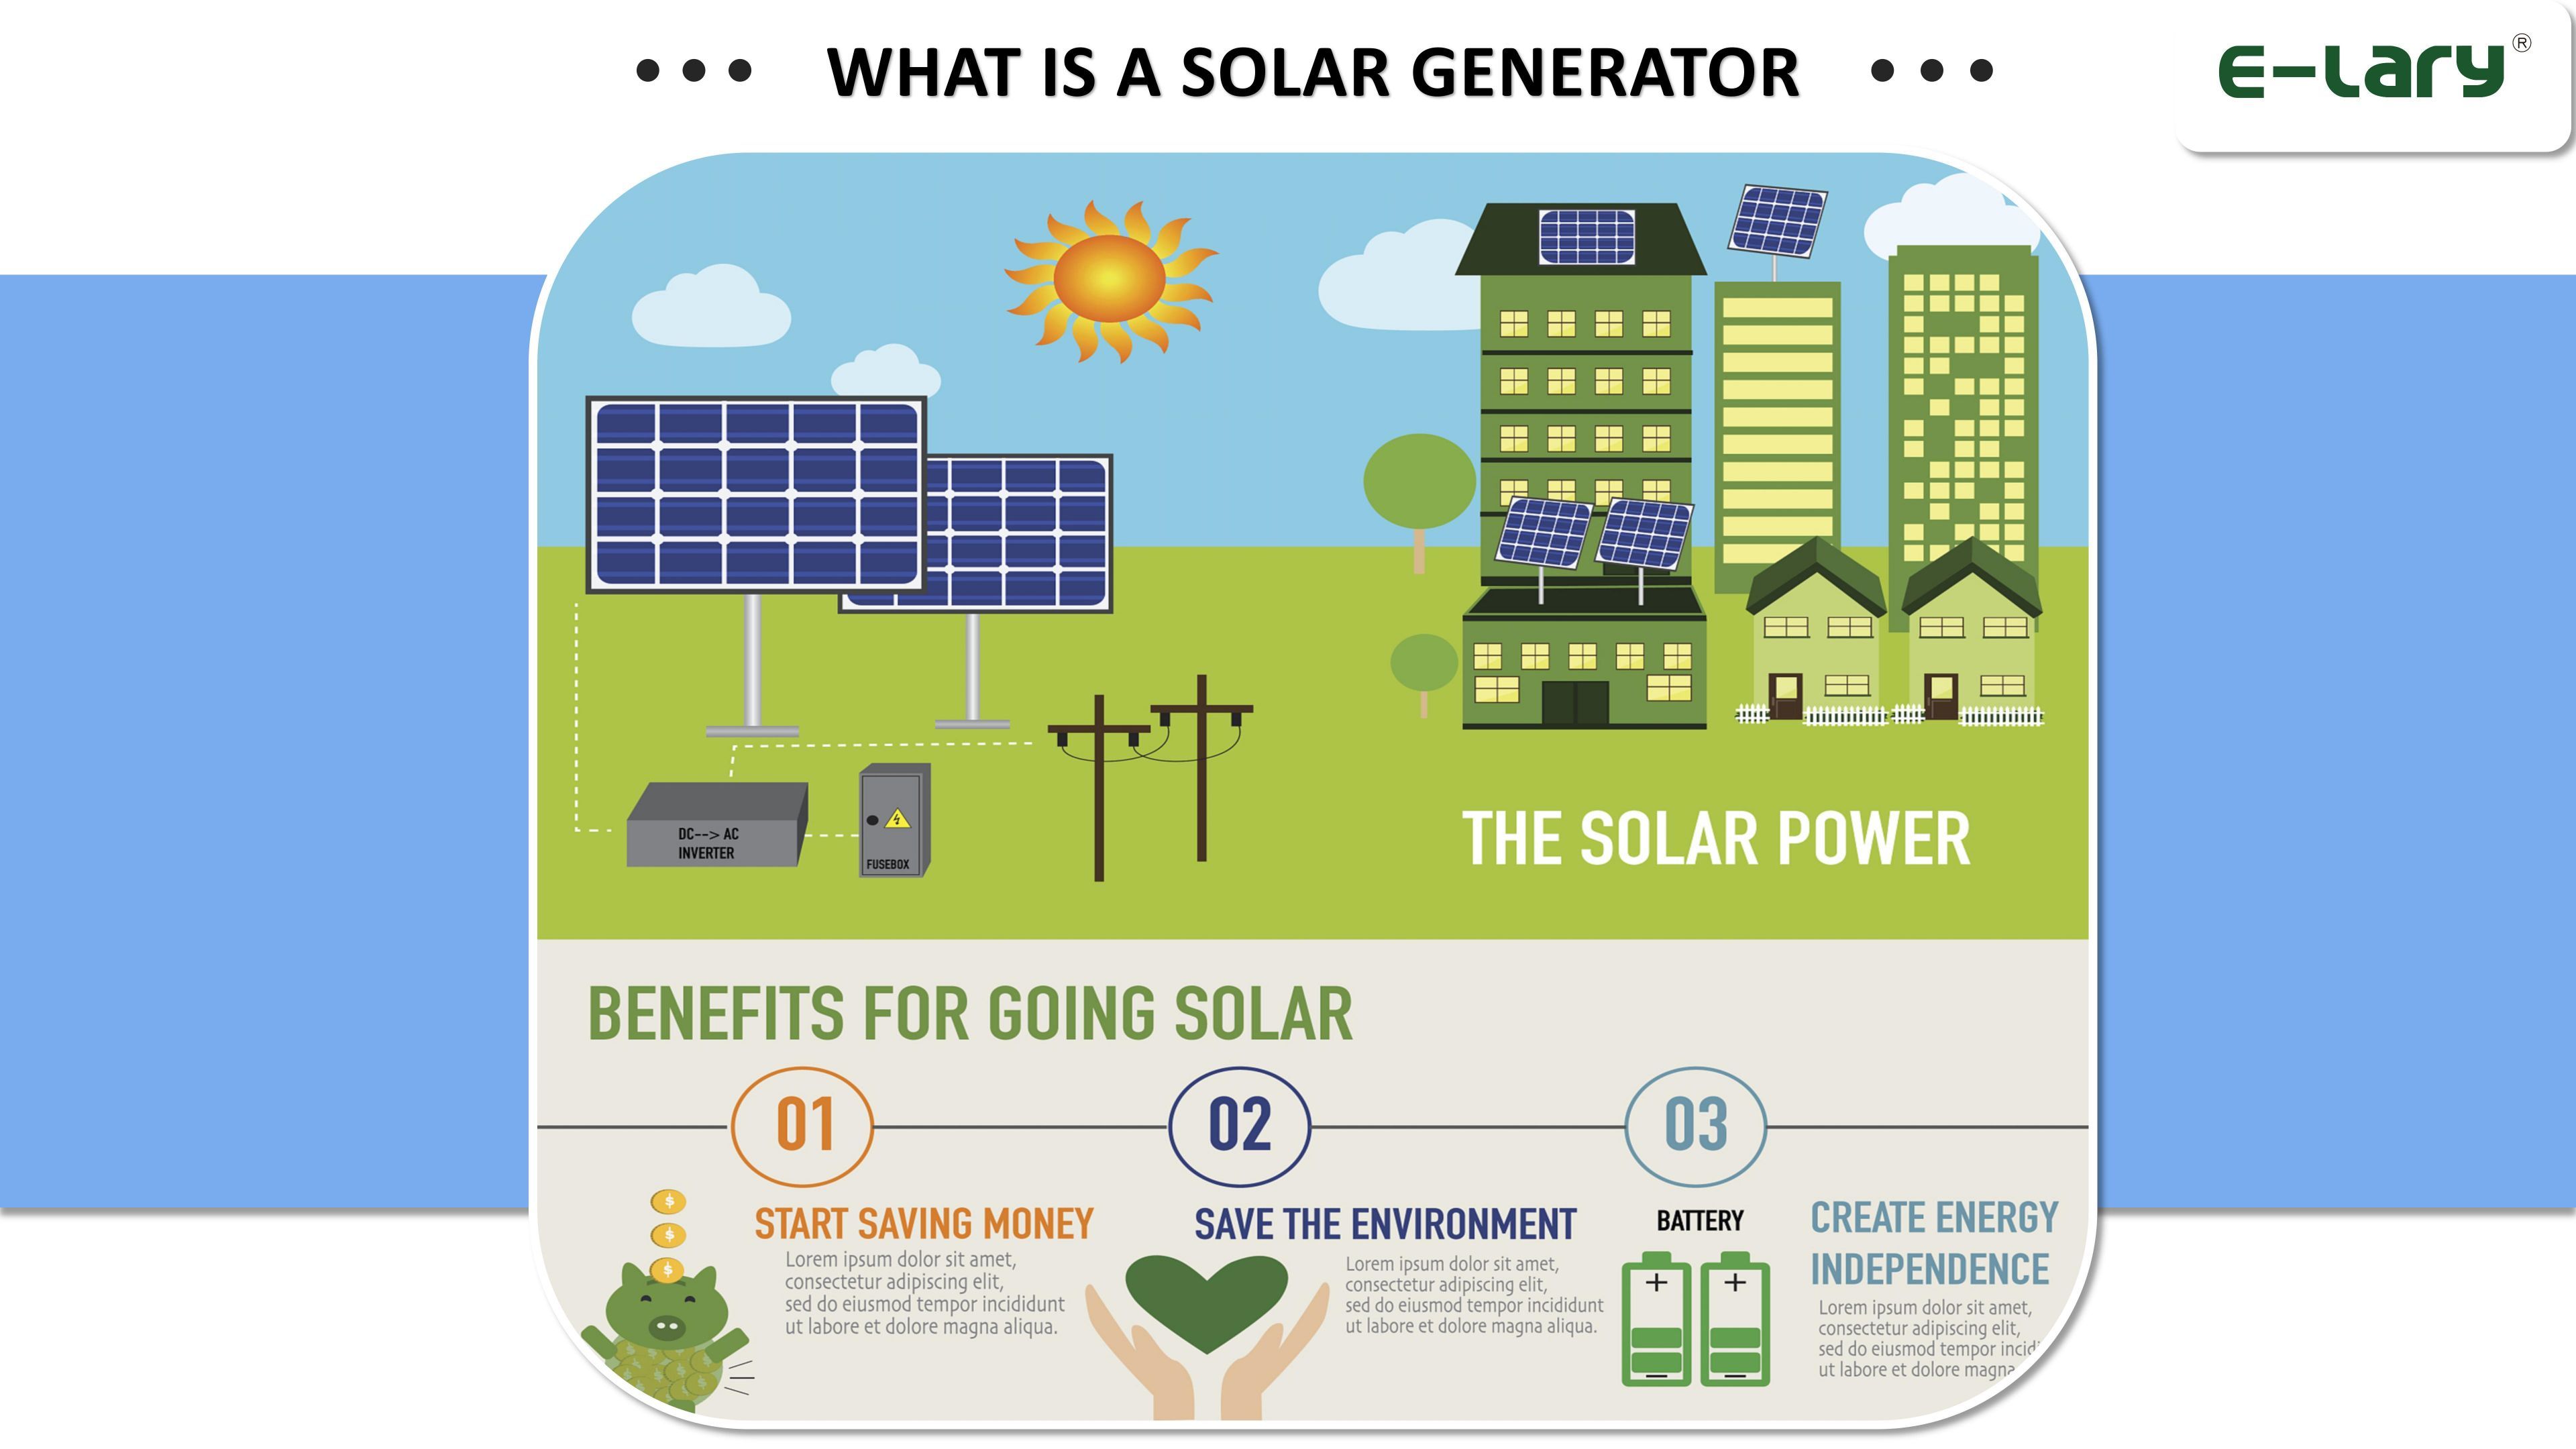 What is a solar generator?